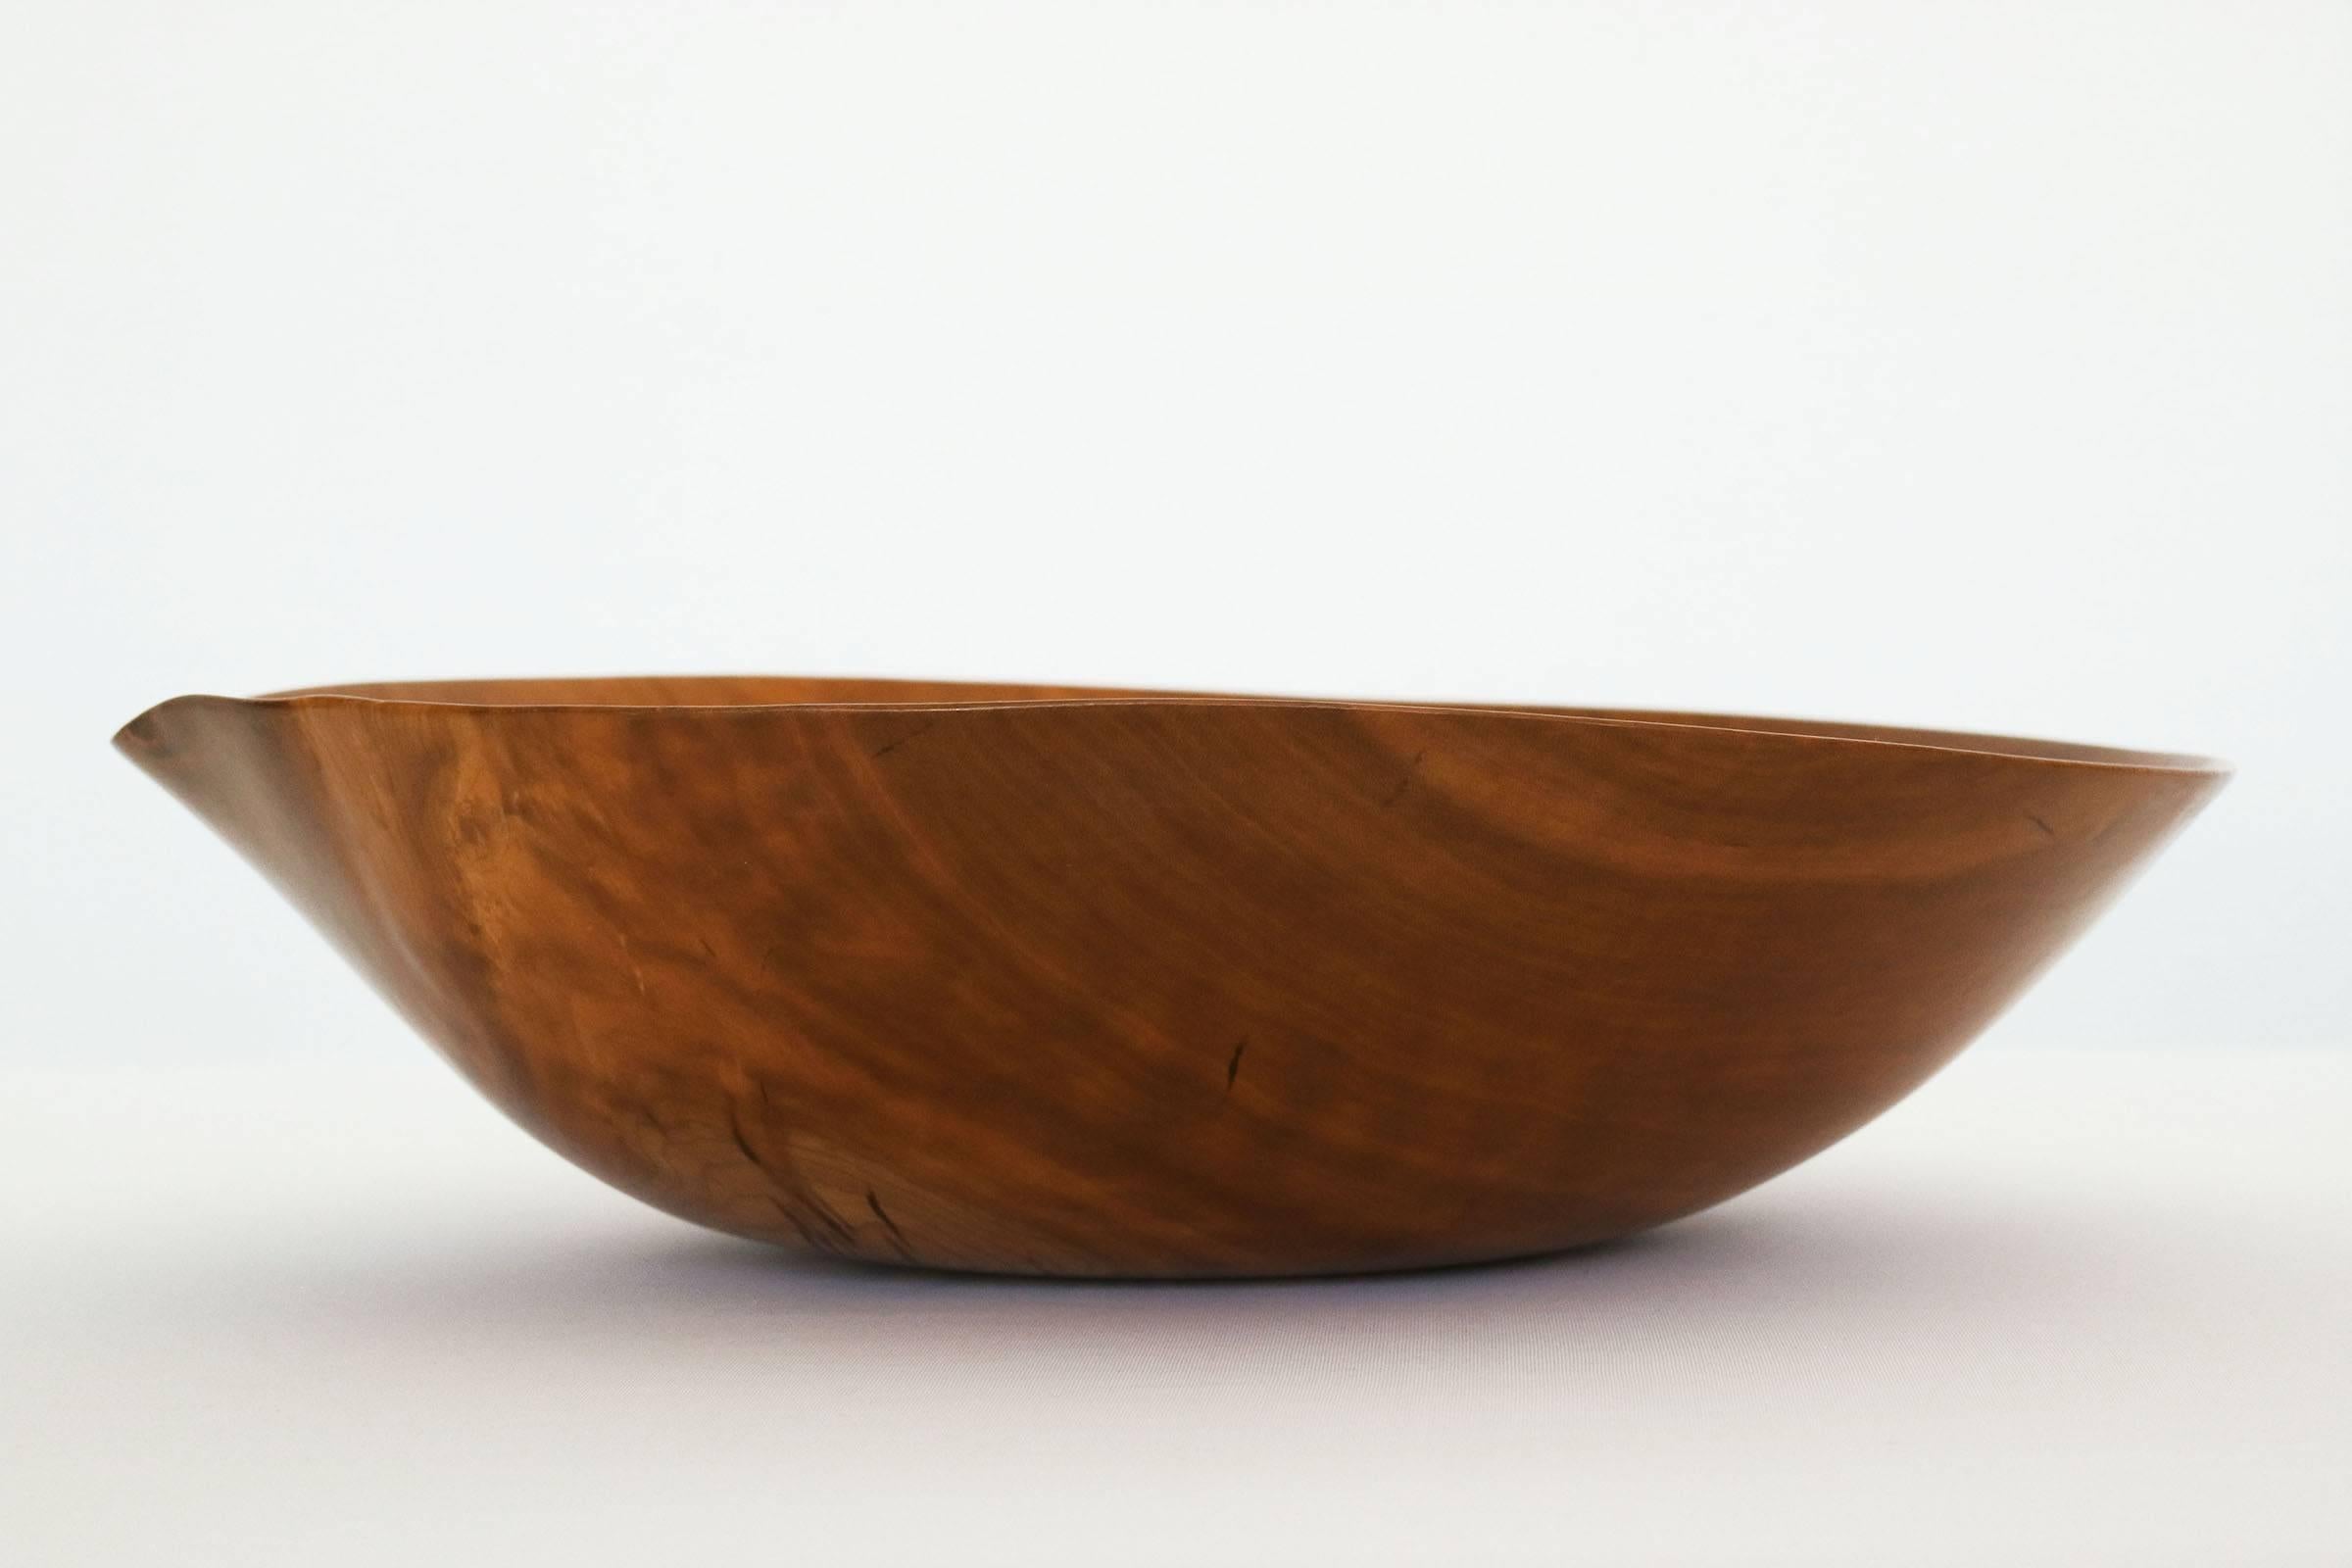 Hand turned cherry wood, fine example
'Signed'

This item is currently on view in our NYC Greenwich Street Location.